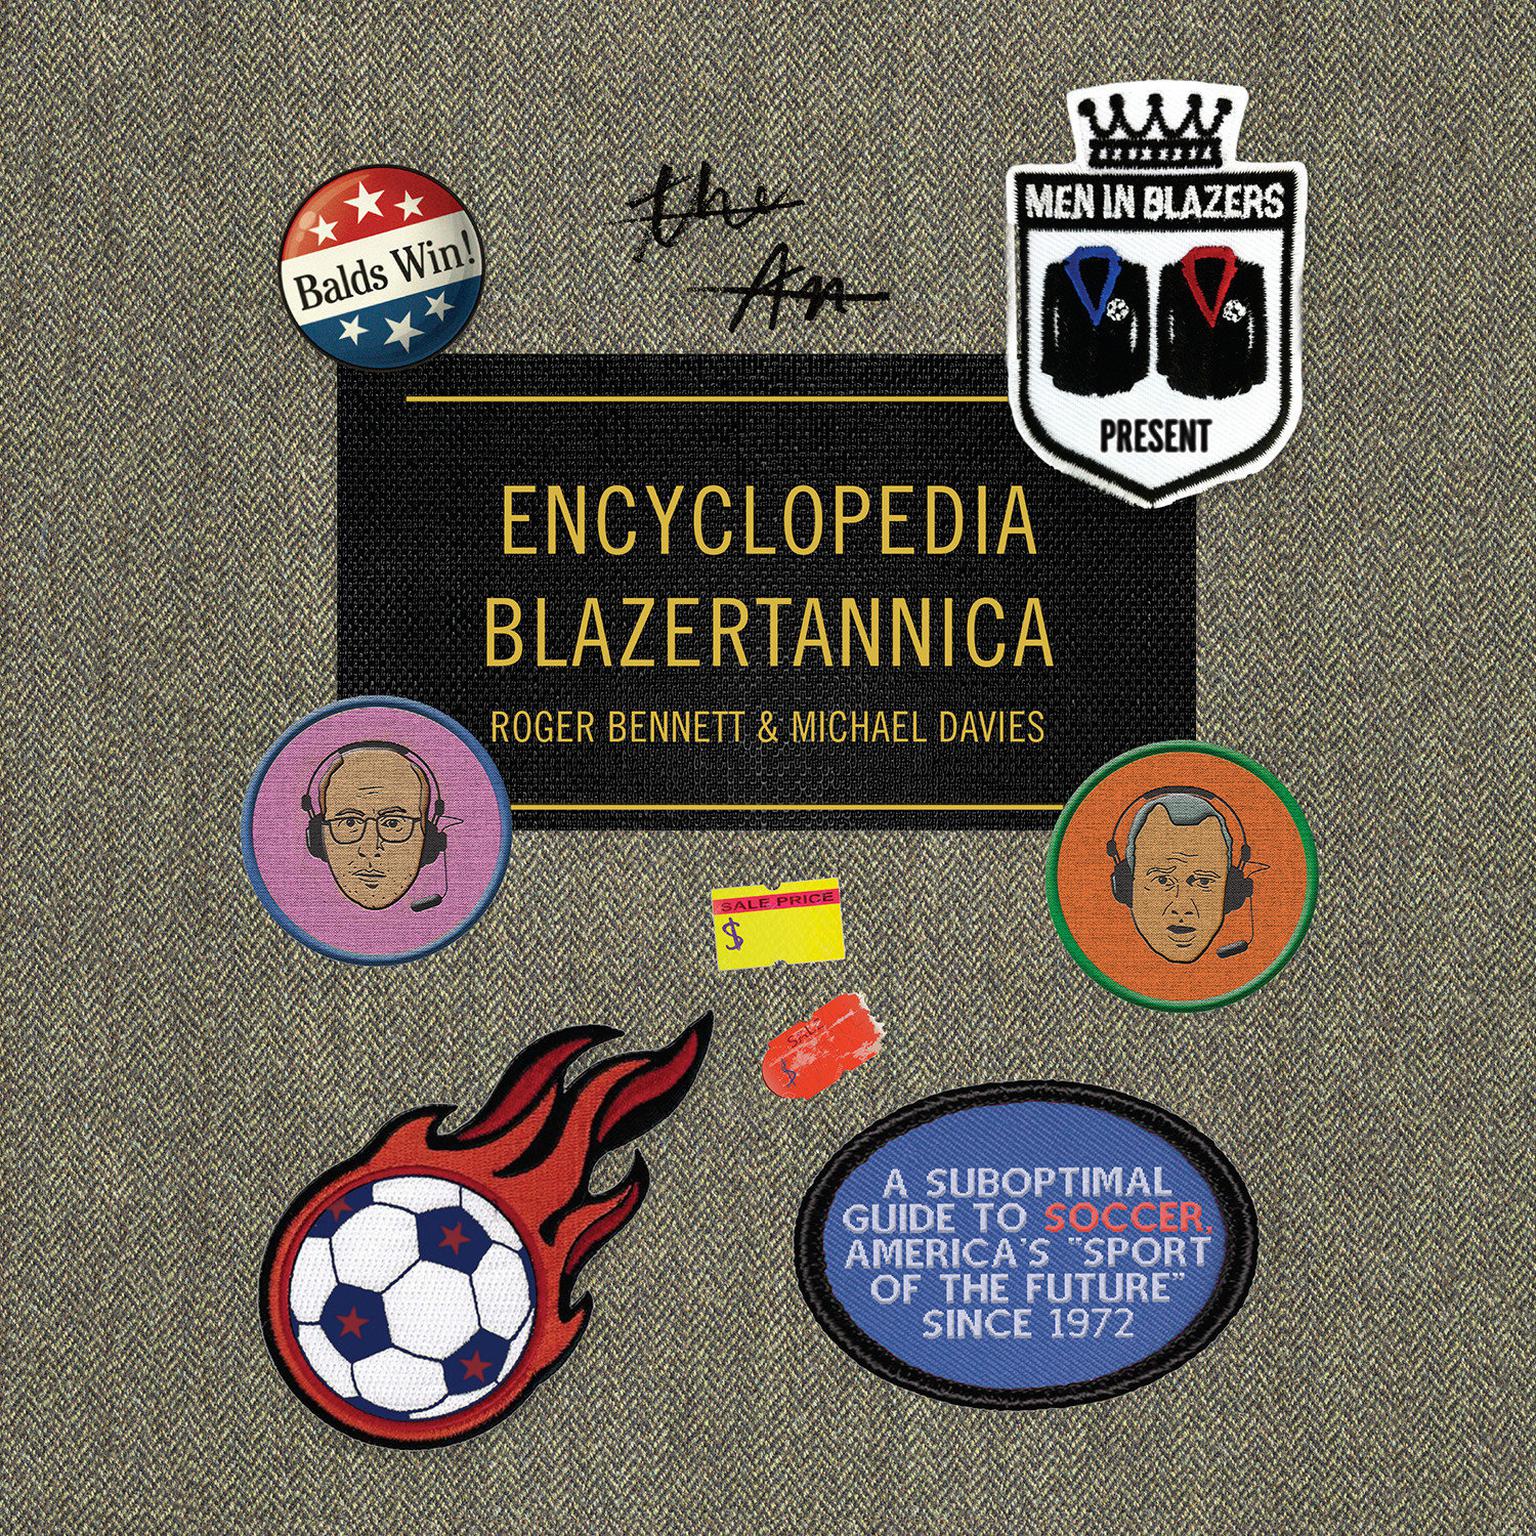 Men in Blazers Present Encyclopedia Blazertannica: A Suboptimal Guide to Soccer, Americas Sport of the Future Since 1972 Audiobook, by Michael Davies